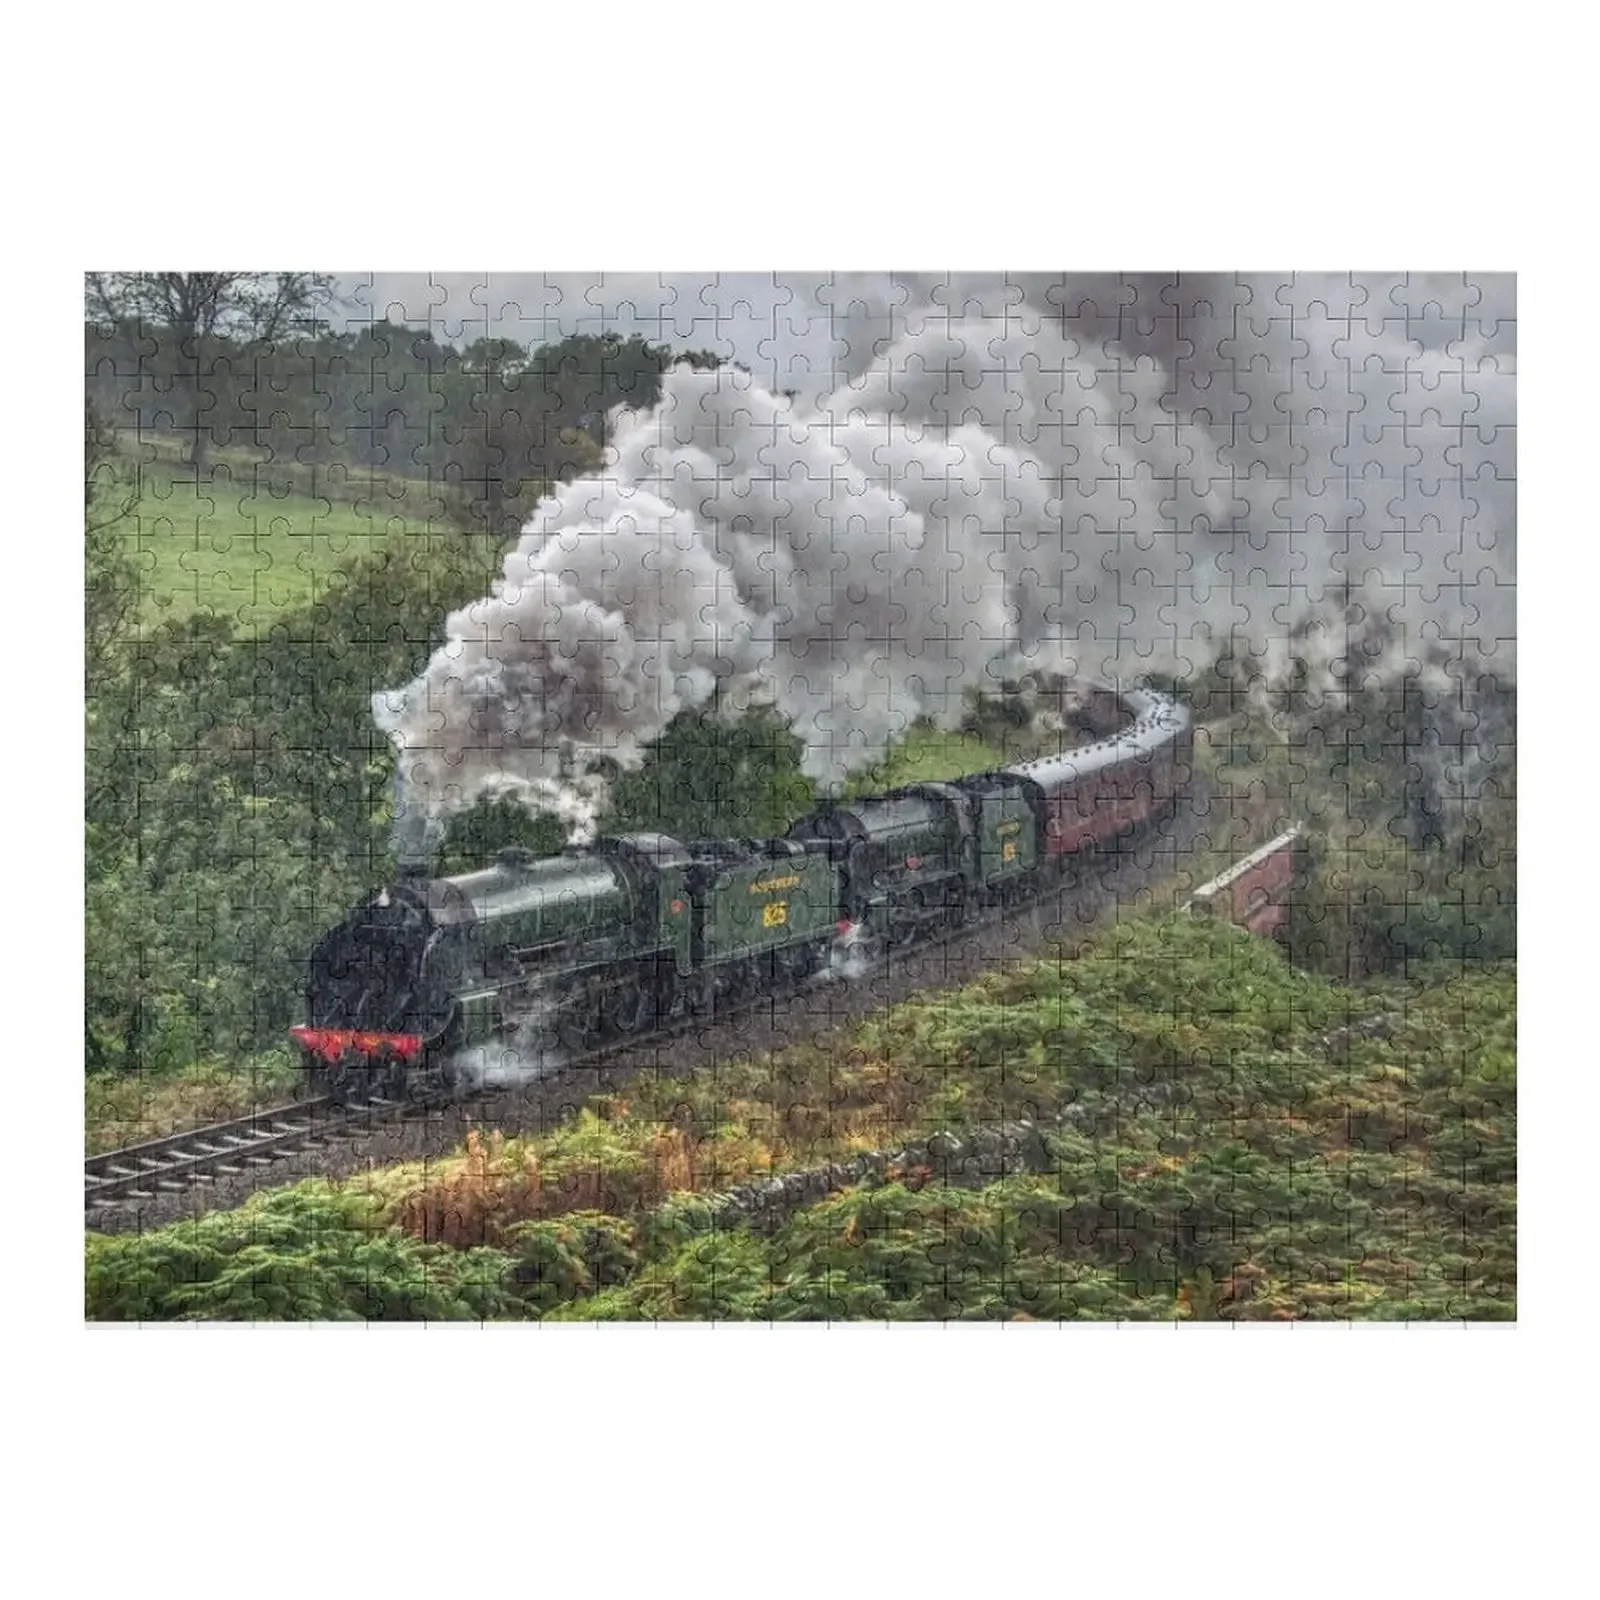 A pair of Southern Railways Locomotives in the rain Jigsaw Puzzle Jigsaw Pieces Adults Personalized Gift Married Puzzle 1 pair ice skate cover guard protector blade guards for hockey skates figure skates ice skates skating for kids adults